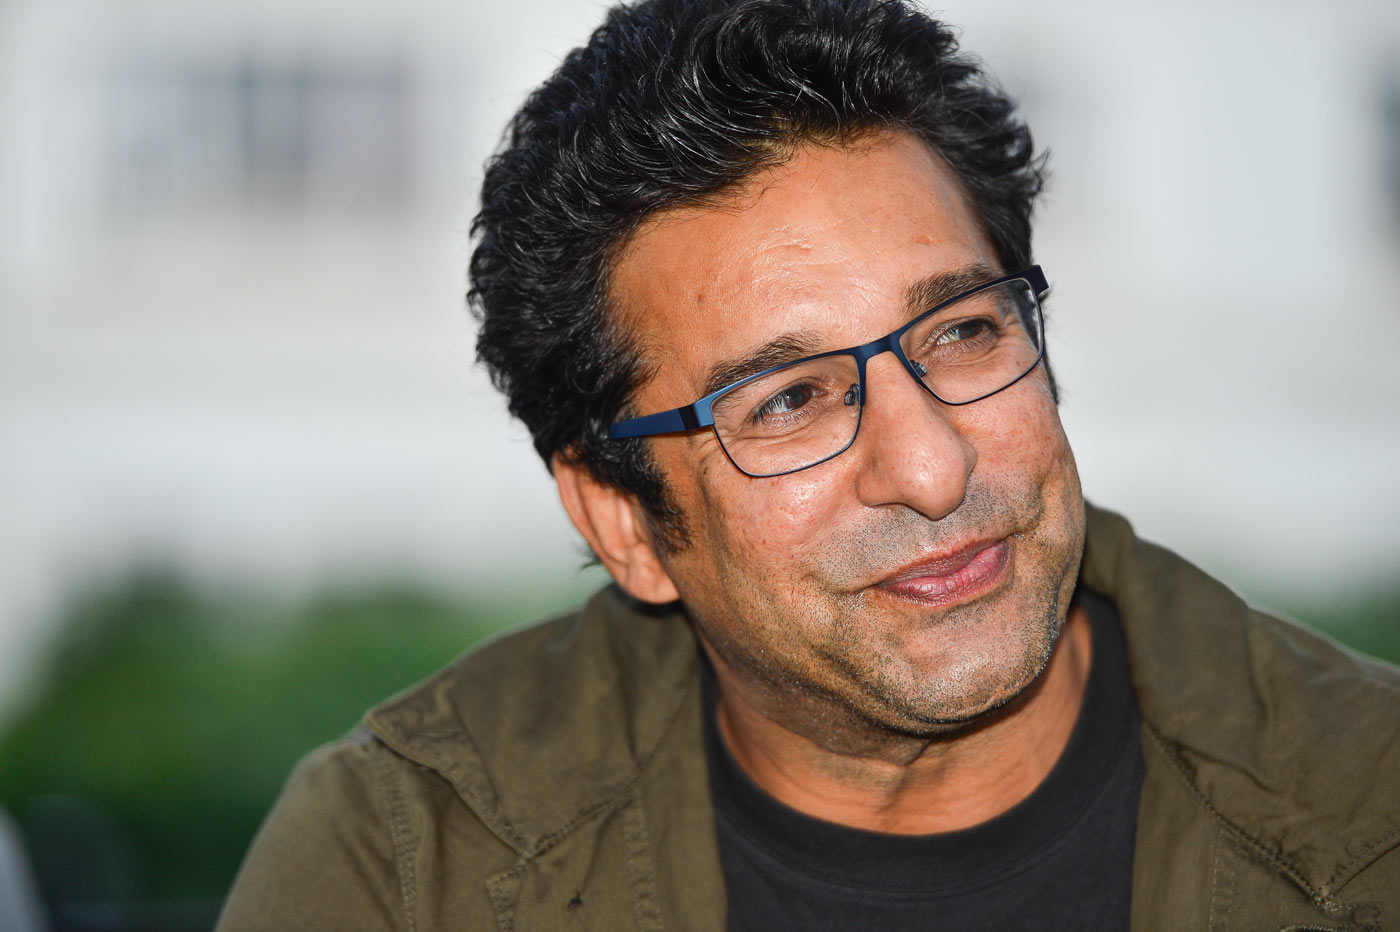 wasim akram talks about fast bowling during an interview with espncricinfo photo courtesy cricinfo